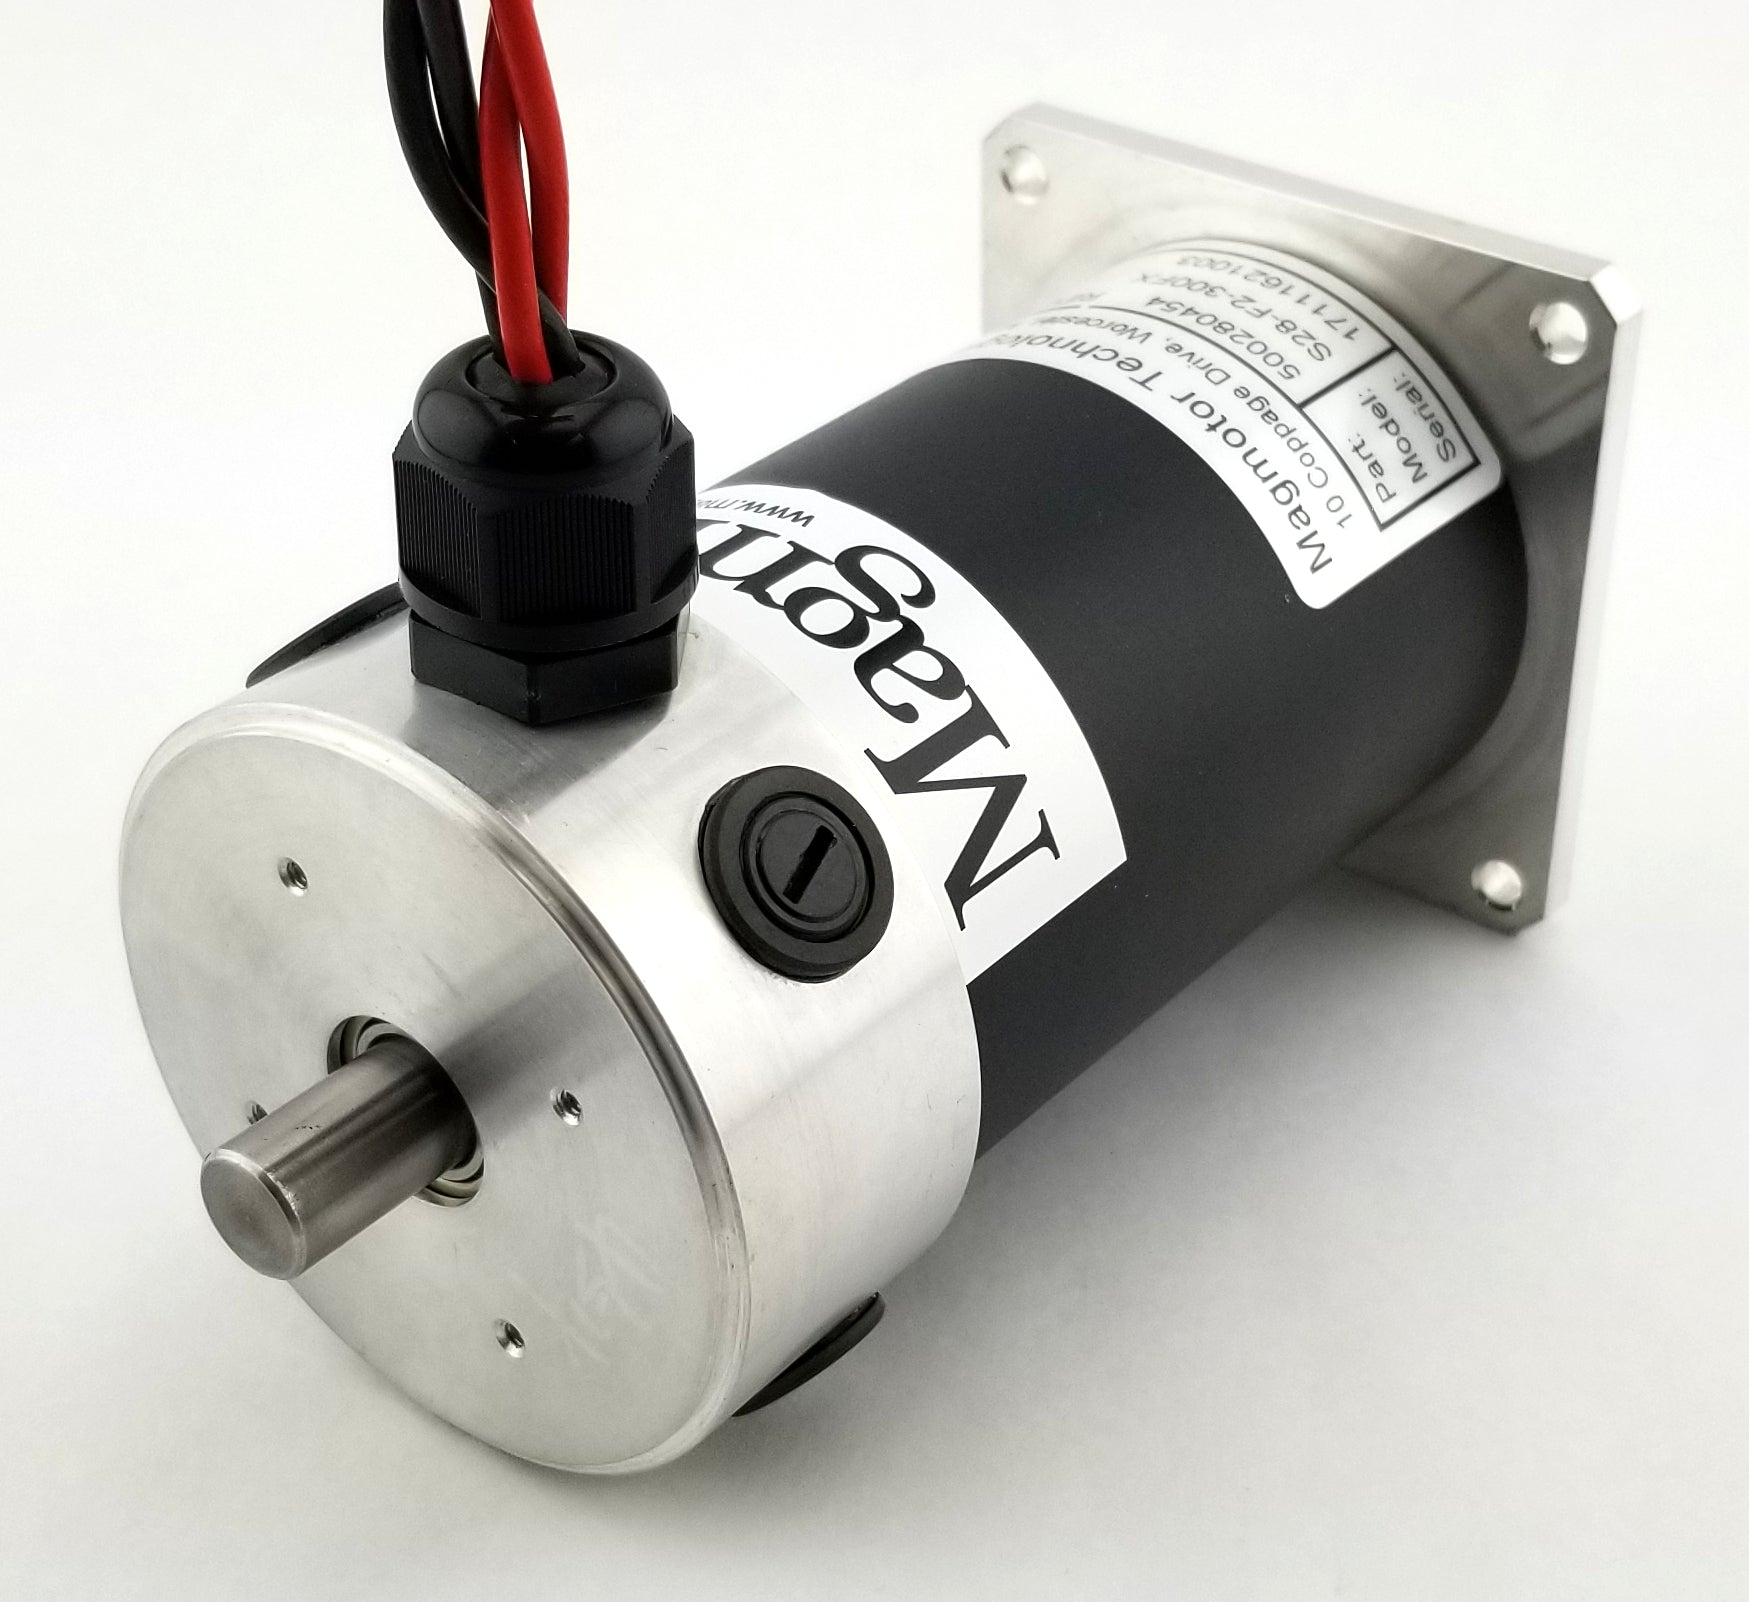 Magmotor S28-F2-300FX 24 to 36 Volt 4 Pole Brushed Motor 500280454 Rear View